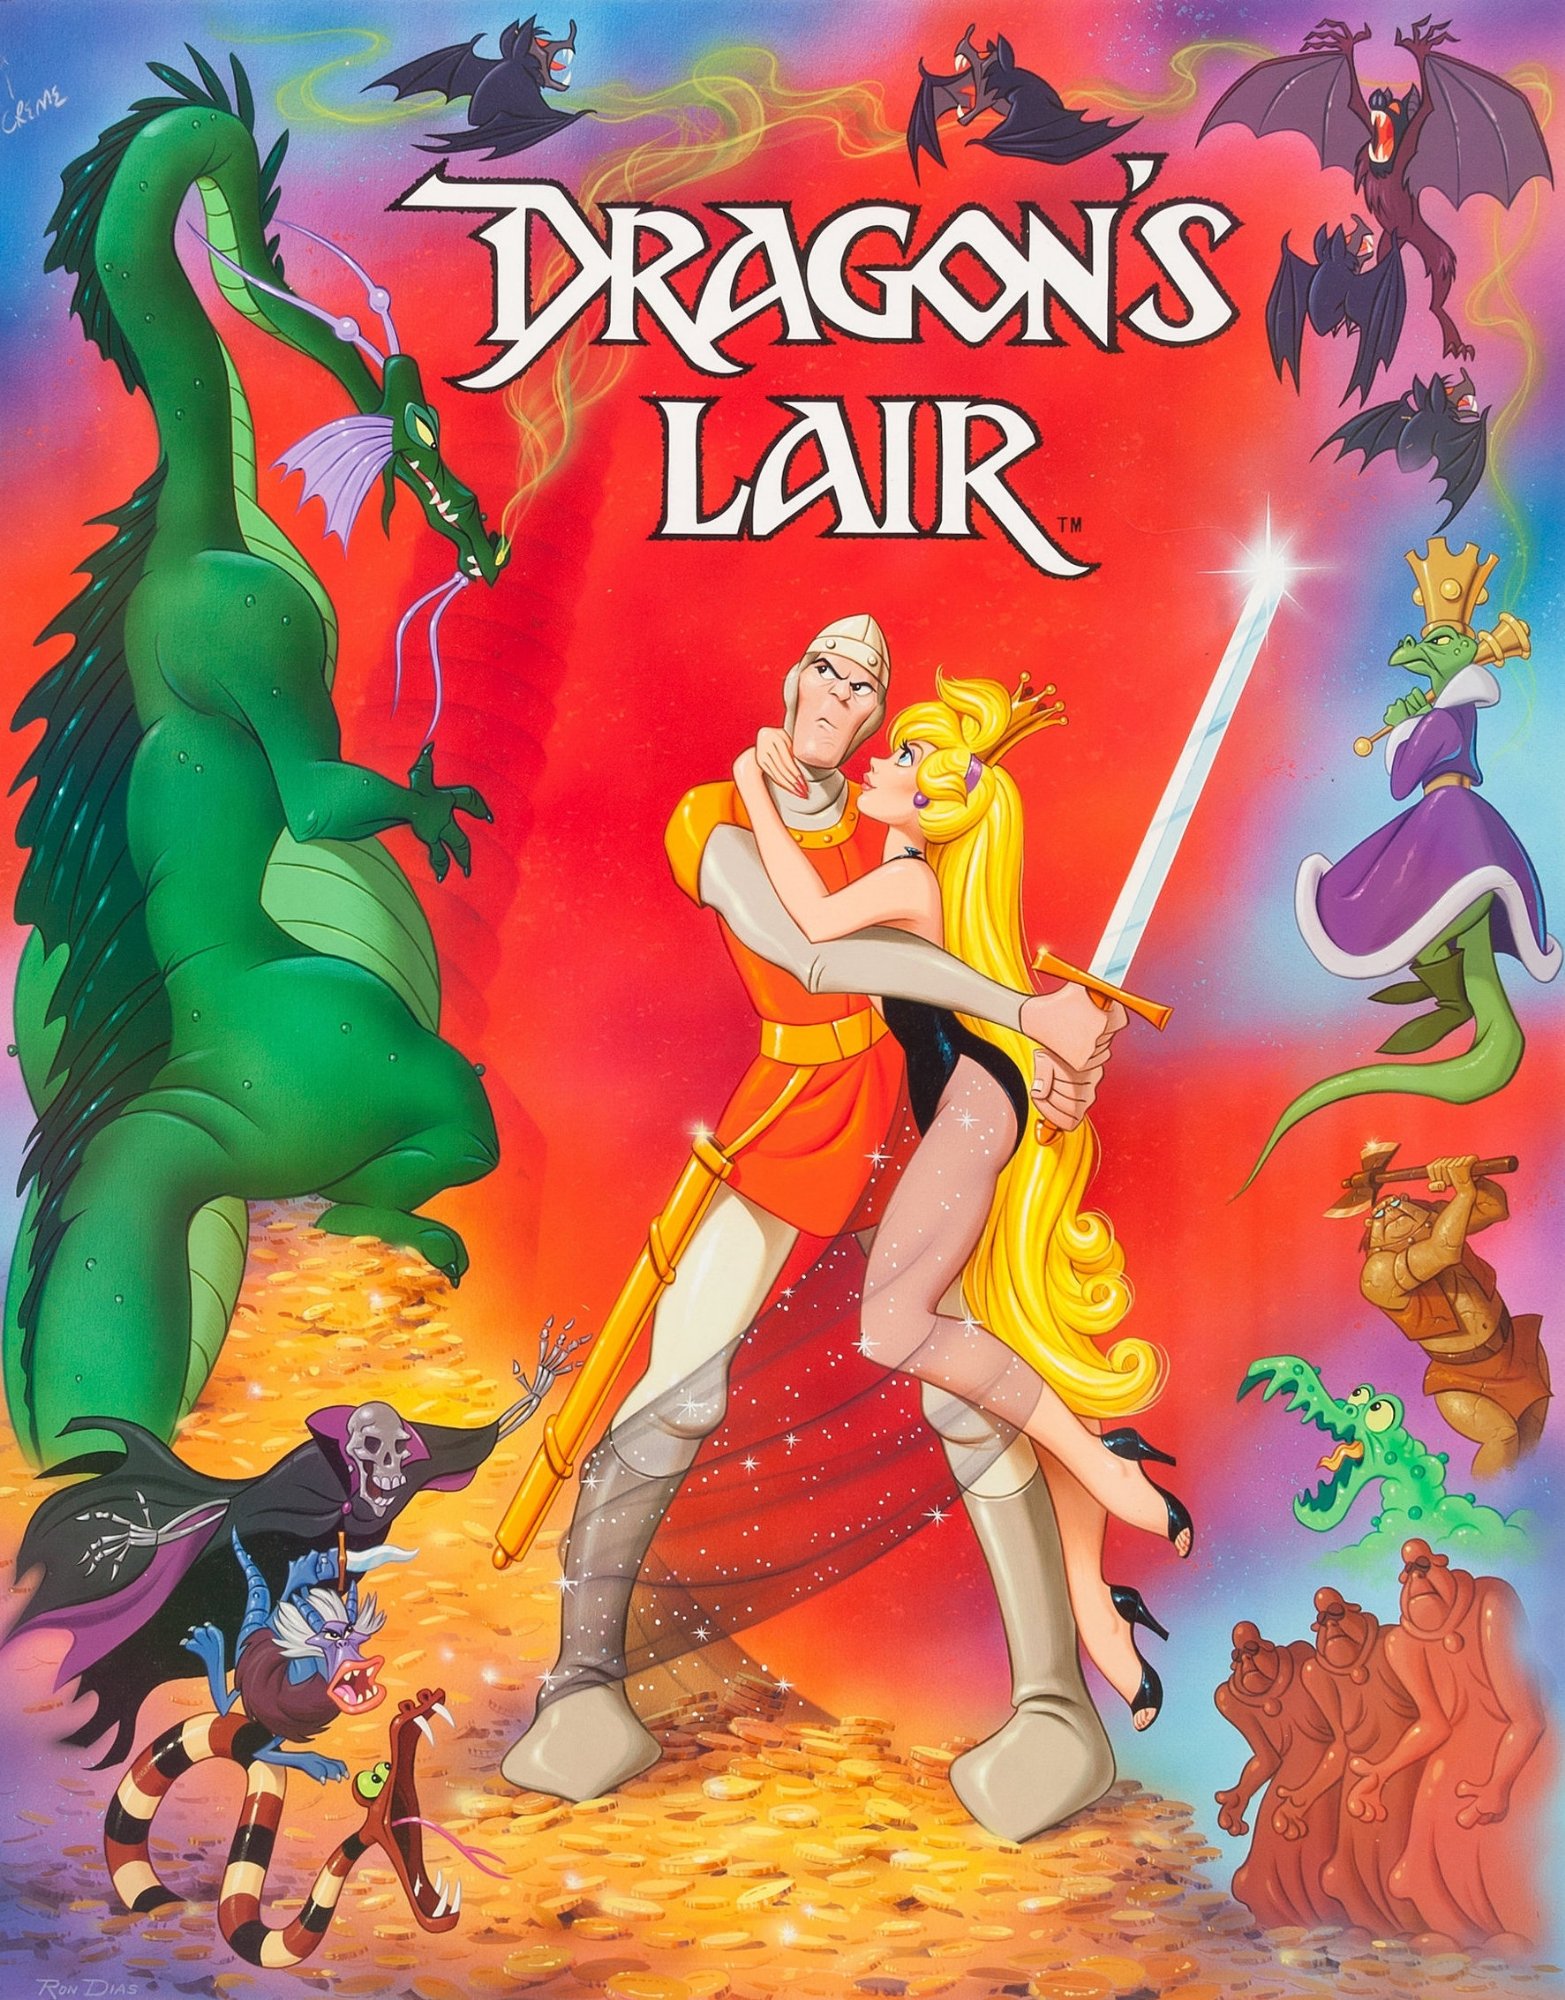 Dragon S Lair Promotional Poster 19 Artwork In Imran A S Video Game Artwork Comic Art Gallery Room